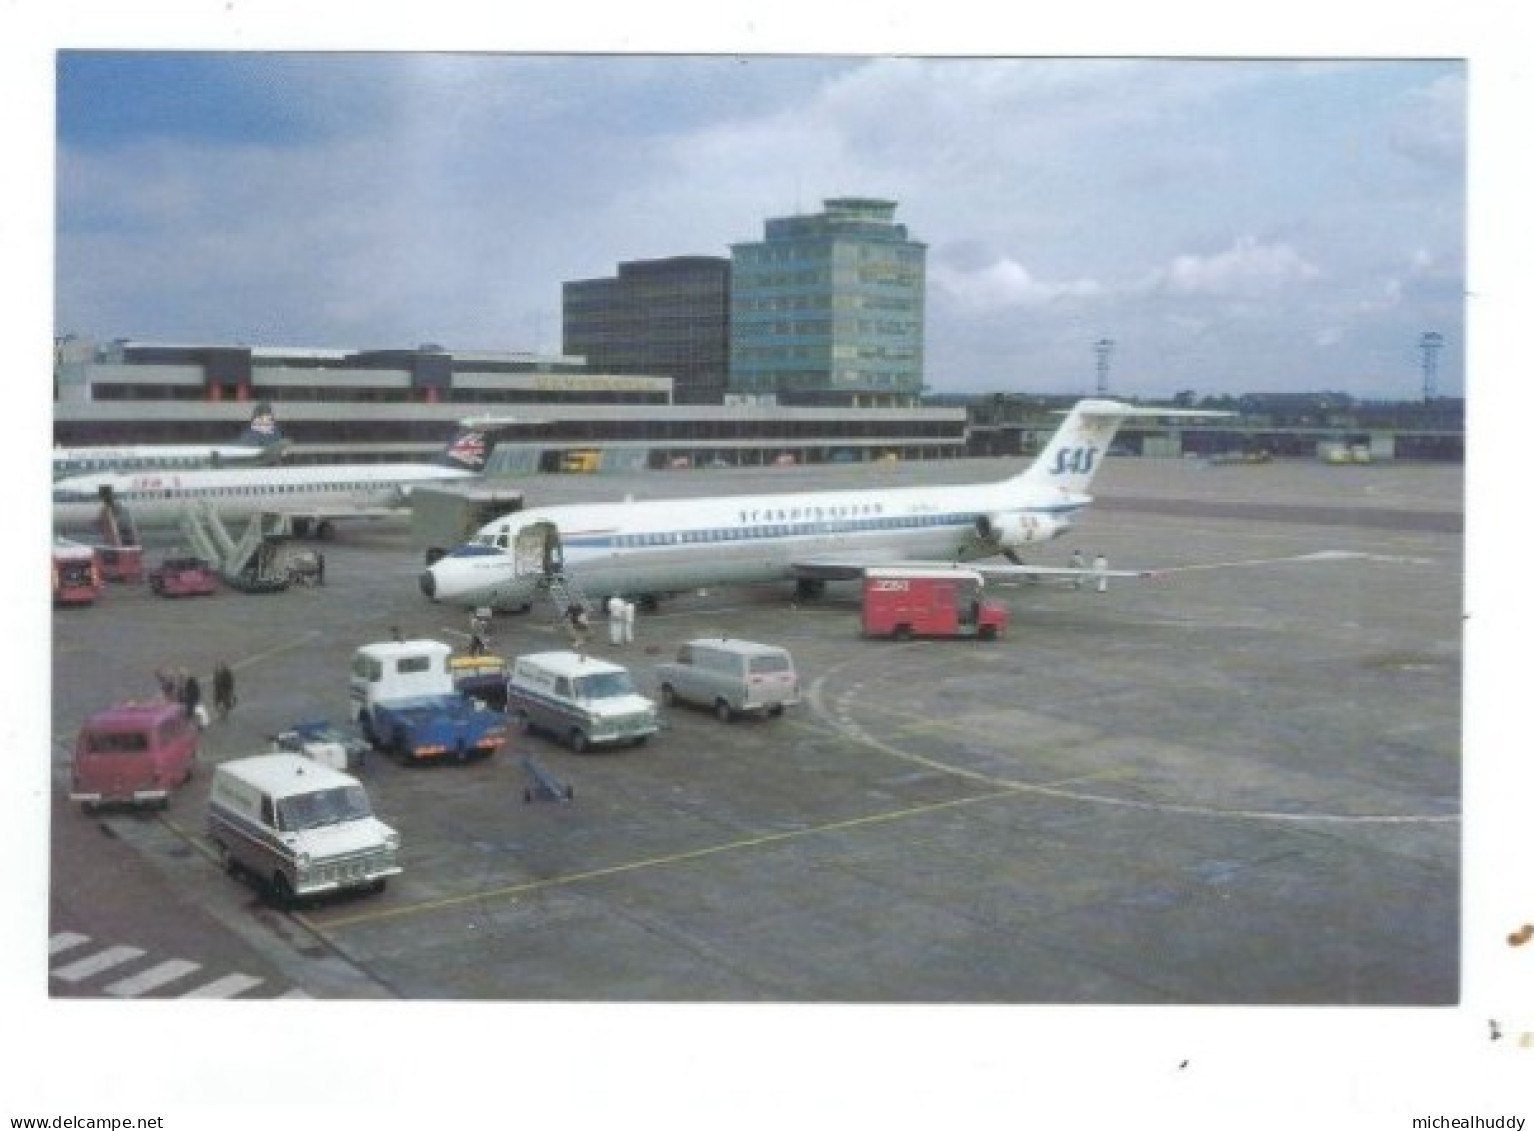 POSTCARD   PUBL BY  BY C MCQUAIDE IN HIS AIRPORT SERIES  MANCHESTER INTERNATIONAL  CARD NO  70 - Aerodromes